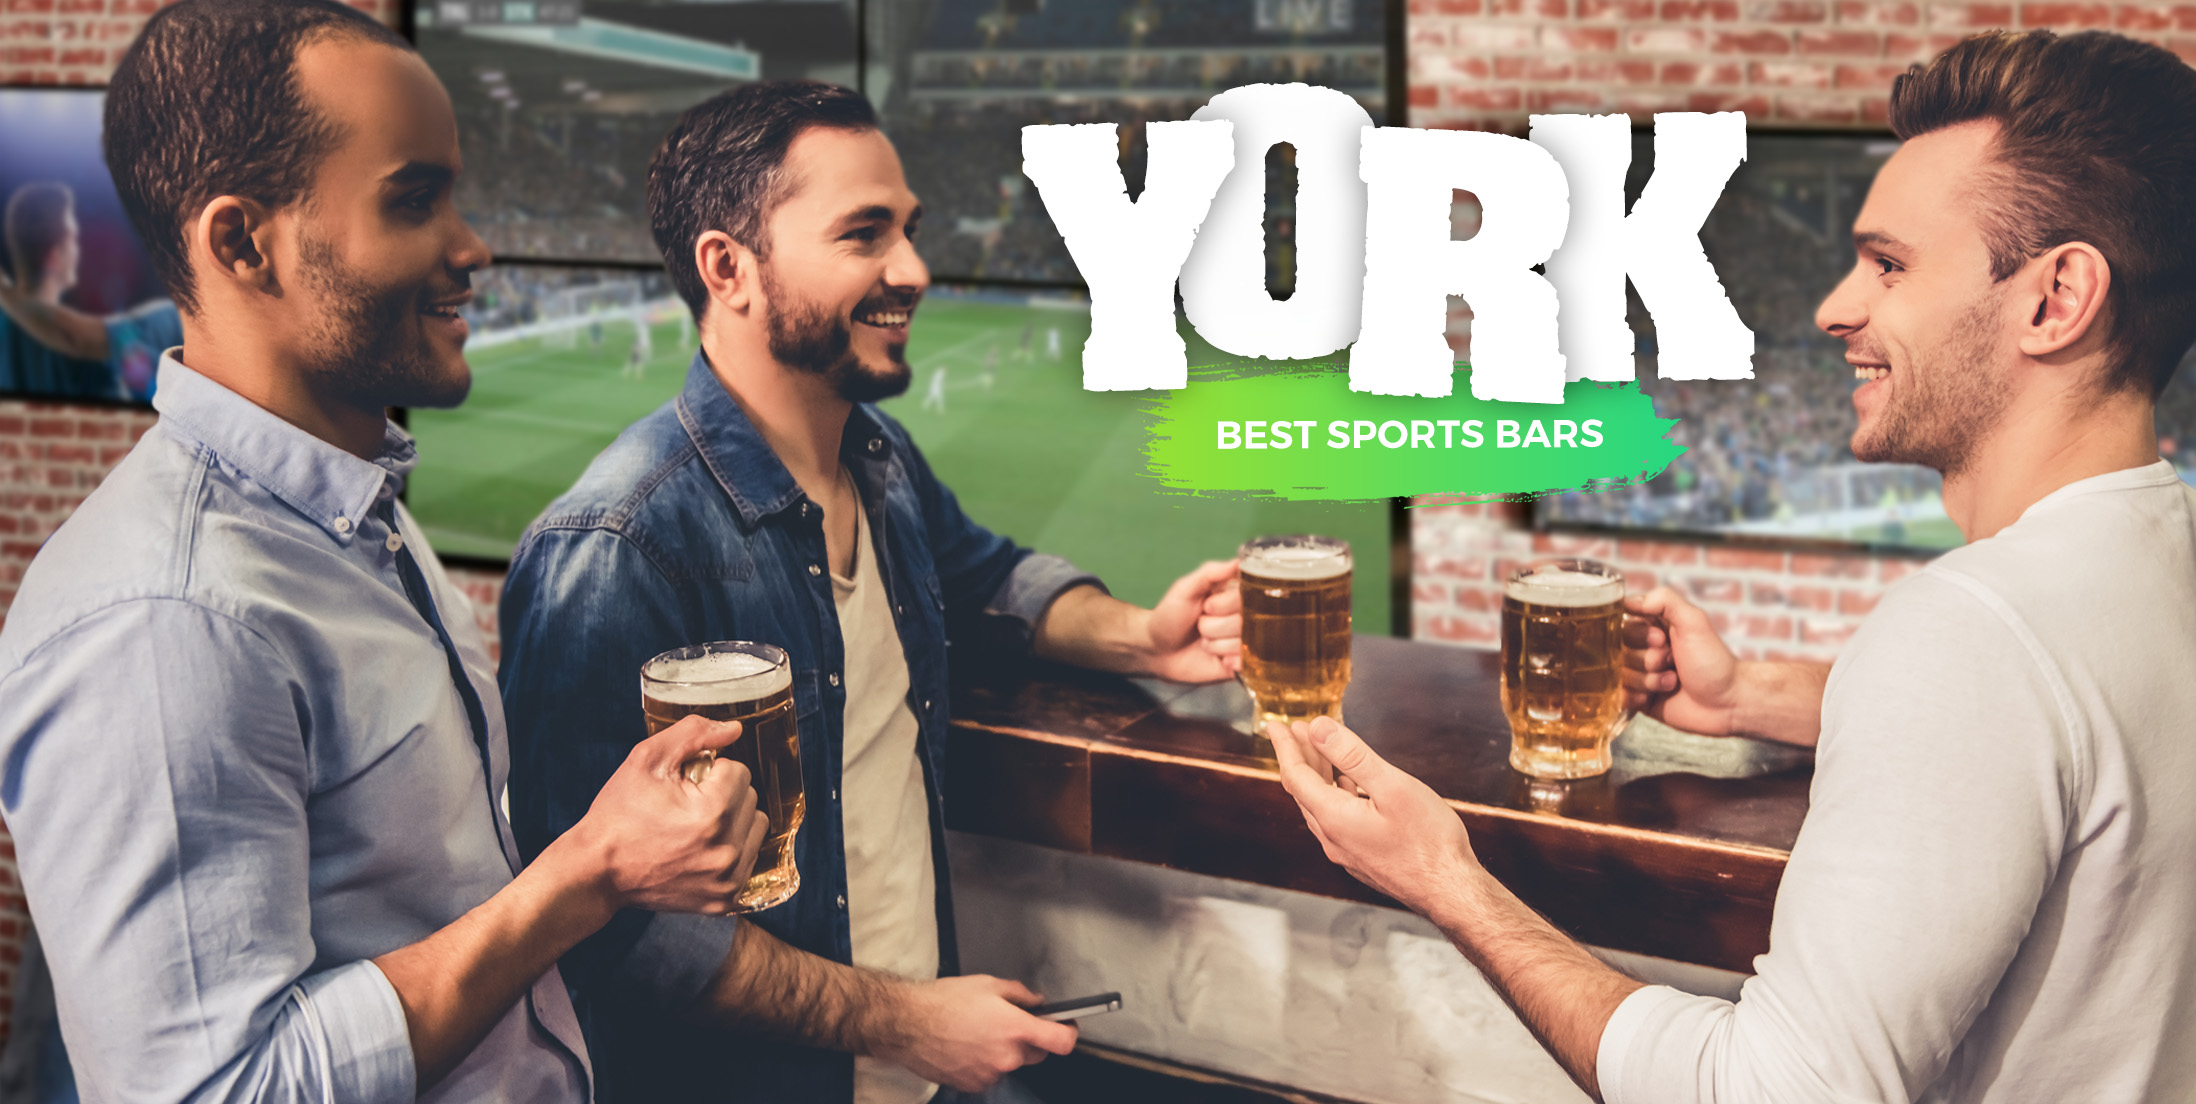 The Best Sports Bars in York